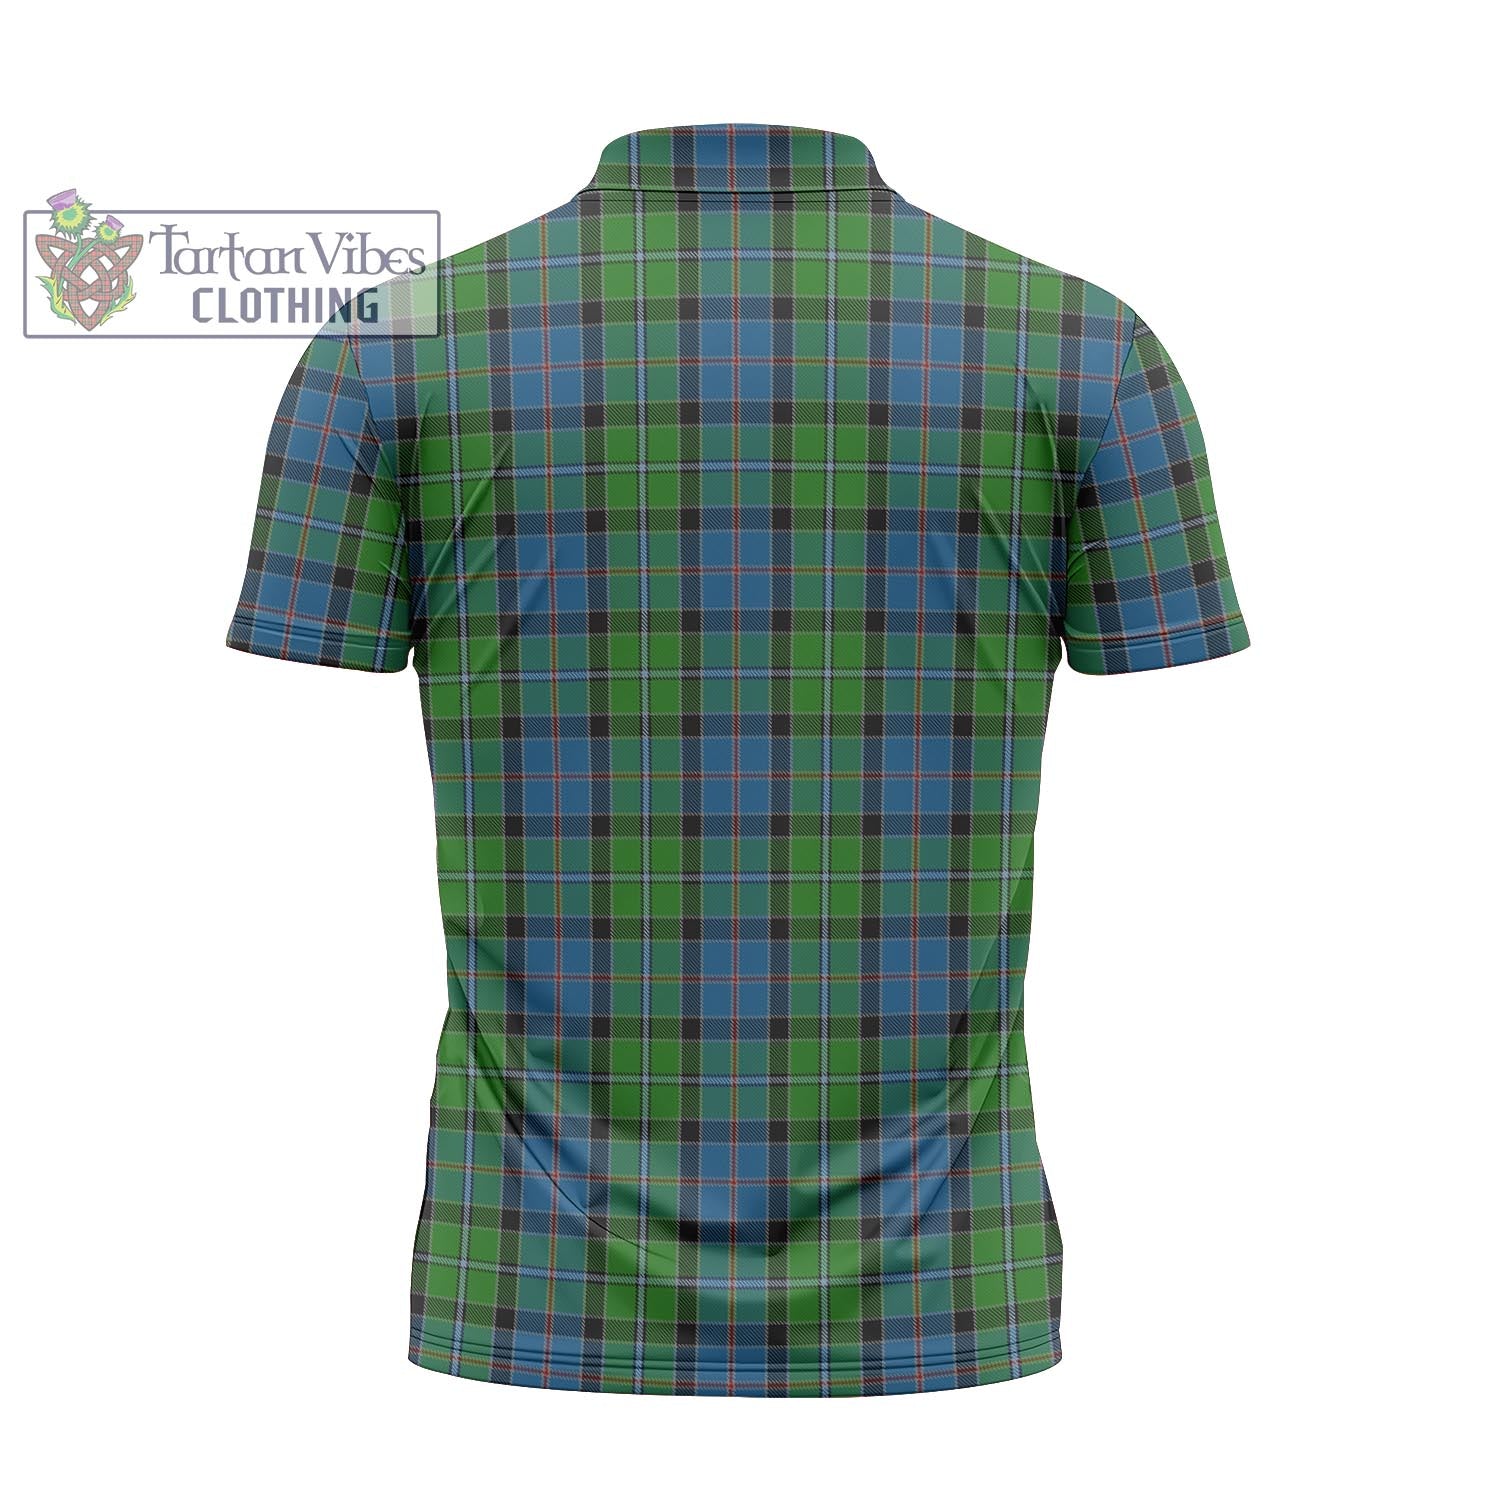 Tartan Vibes Clothing Stirling Tartan Zipper Polo Shirt with Family Crest